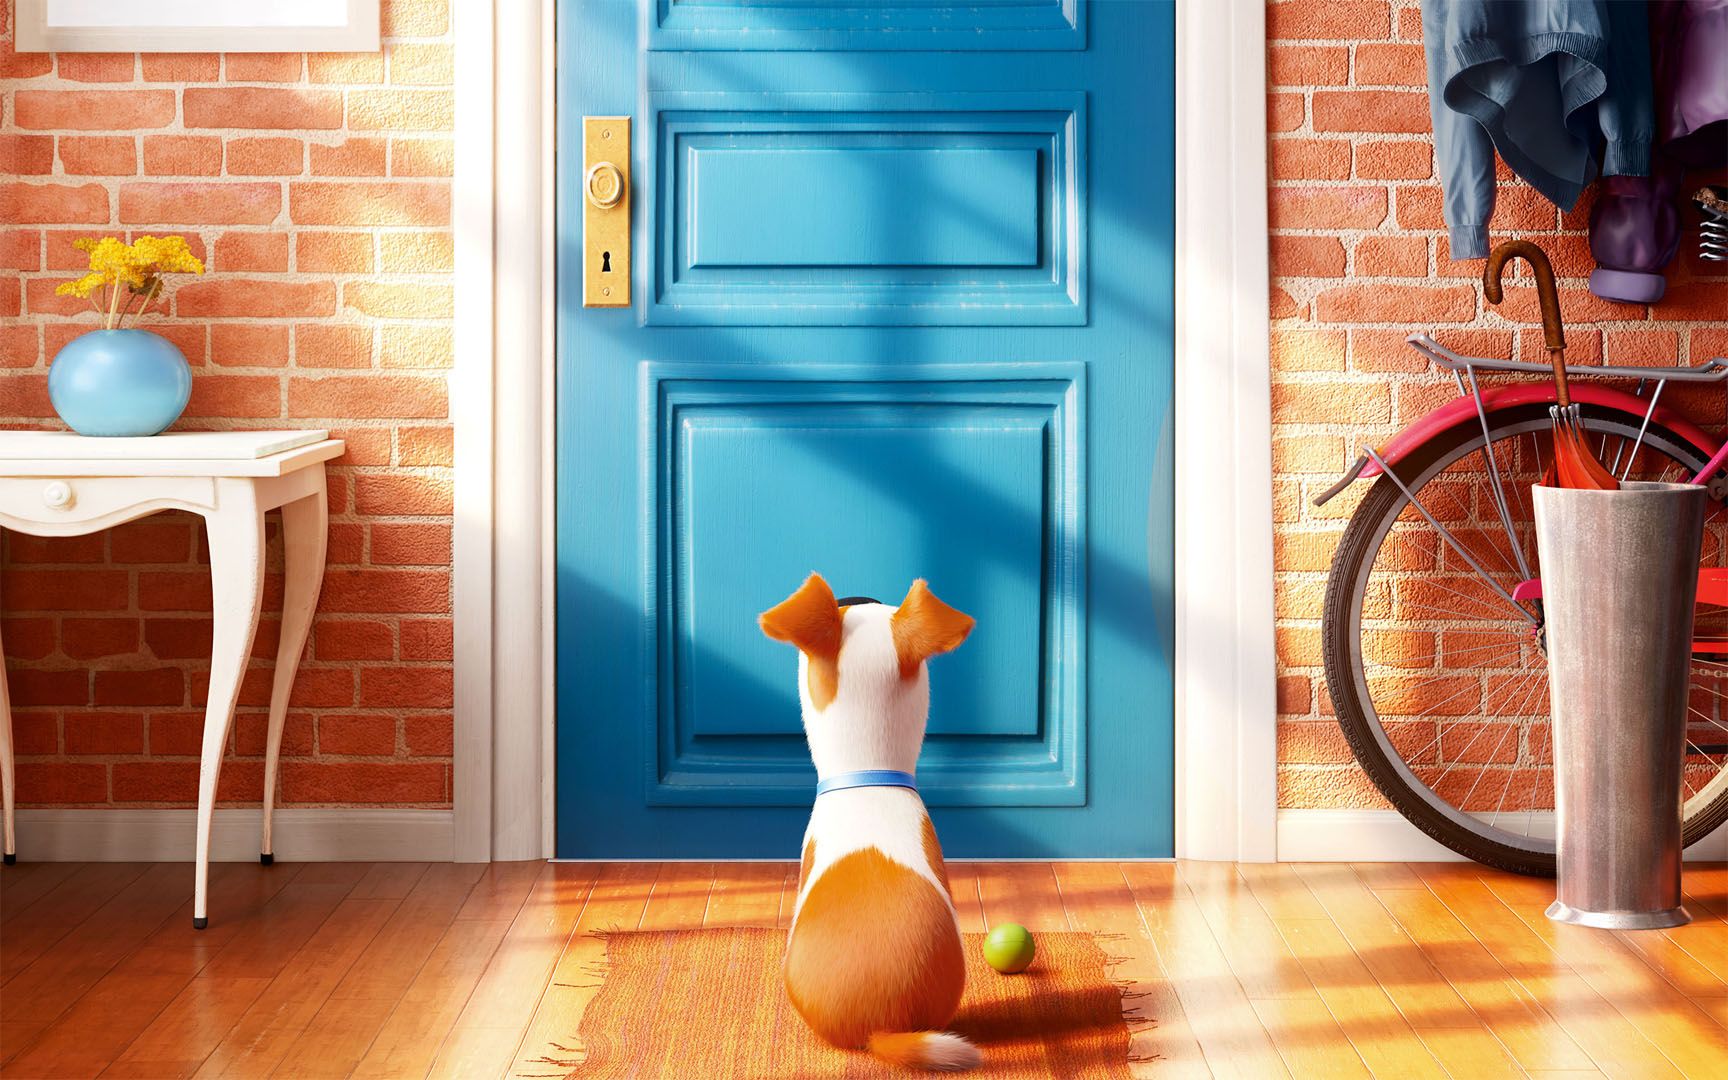 The Secret Life of Pets Animated Movie Wallpaper - DreamLoveWallpapers